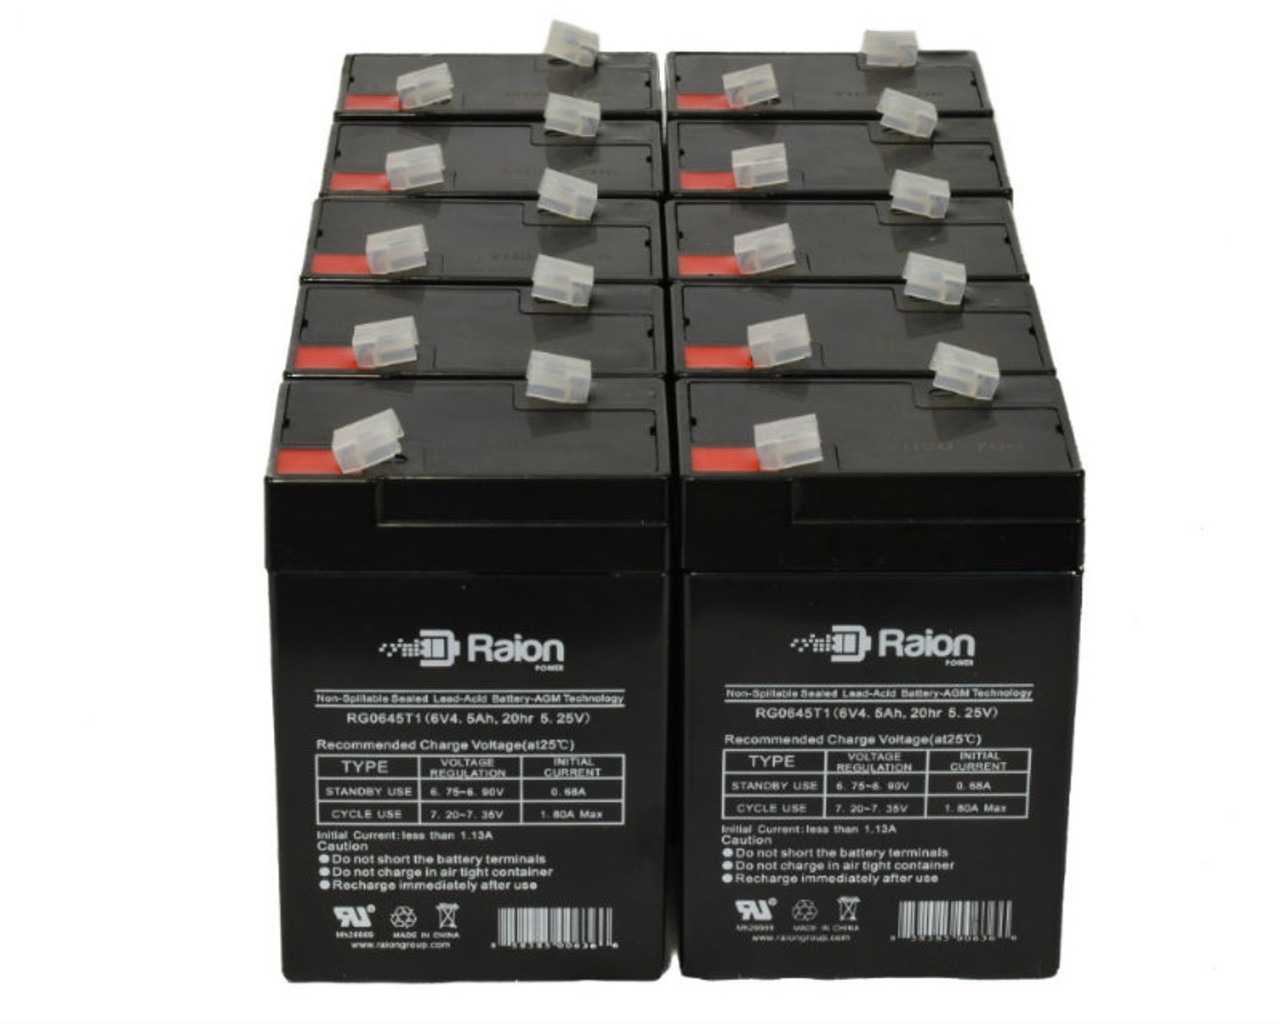 Raion Power 6 Volt 4.5Ah RG0645T1 Replacement Battery for RED DOT DD 06048 - 10 Pack